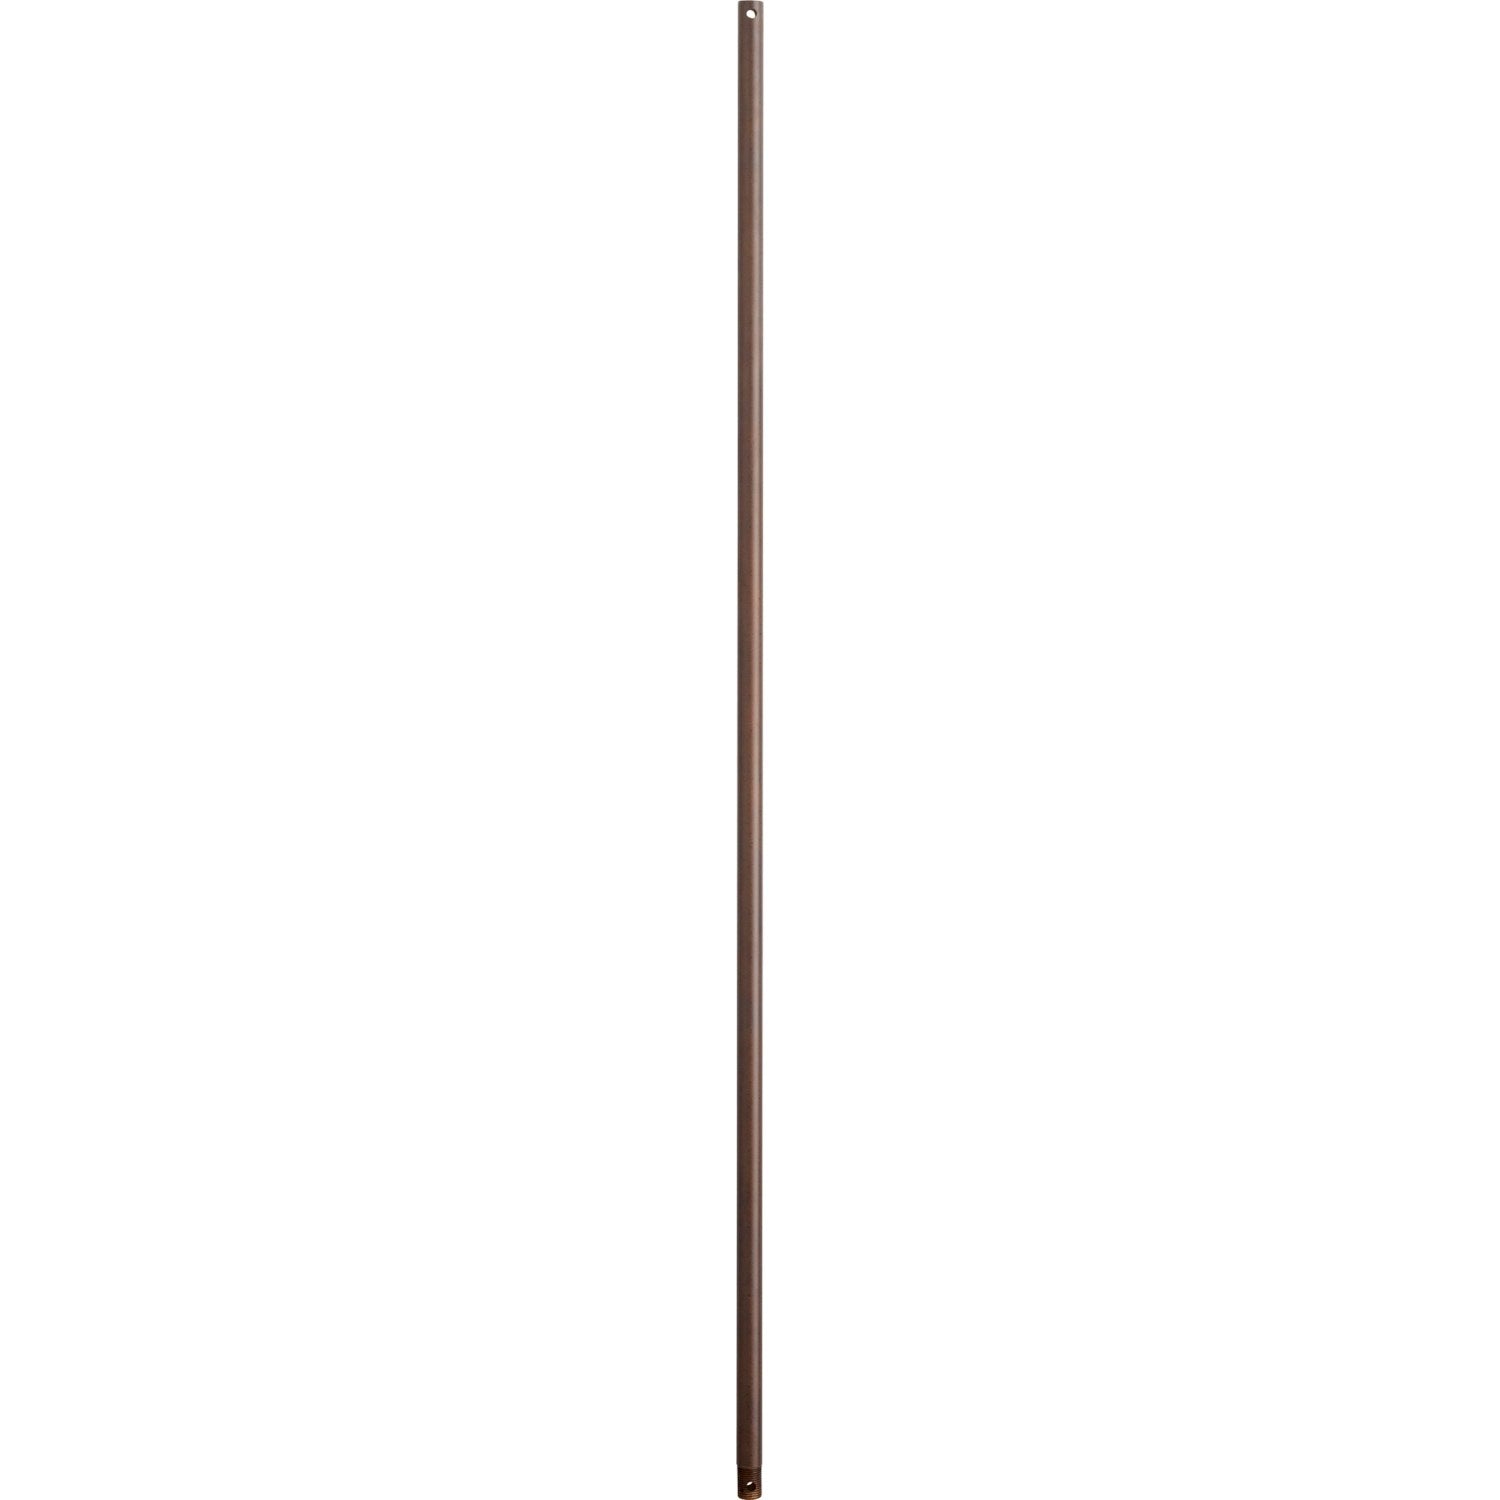 Quorum - 6-4886 - 48" Universal Downrod - 48 in. Downrods - Oiled Bronze